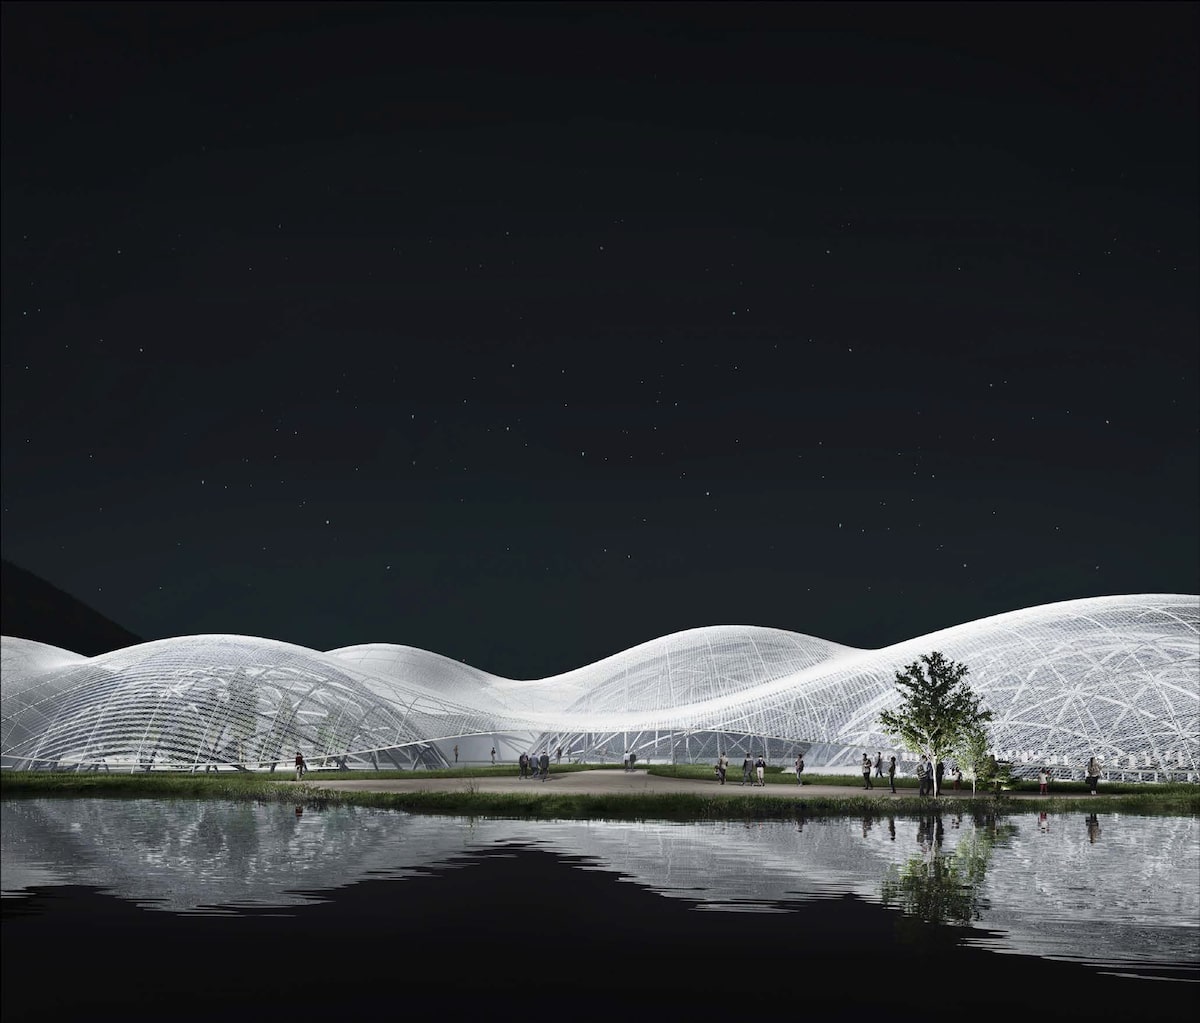 SANAA Wins Competition for Shenzhen Maritime Museum With Billowing Cloud Concept